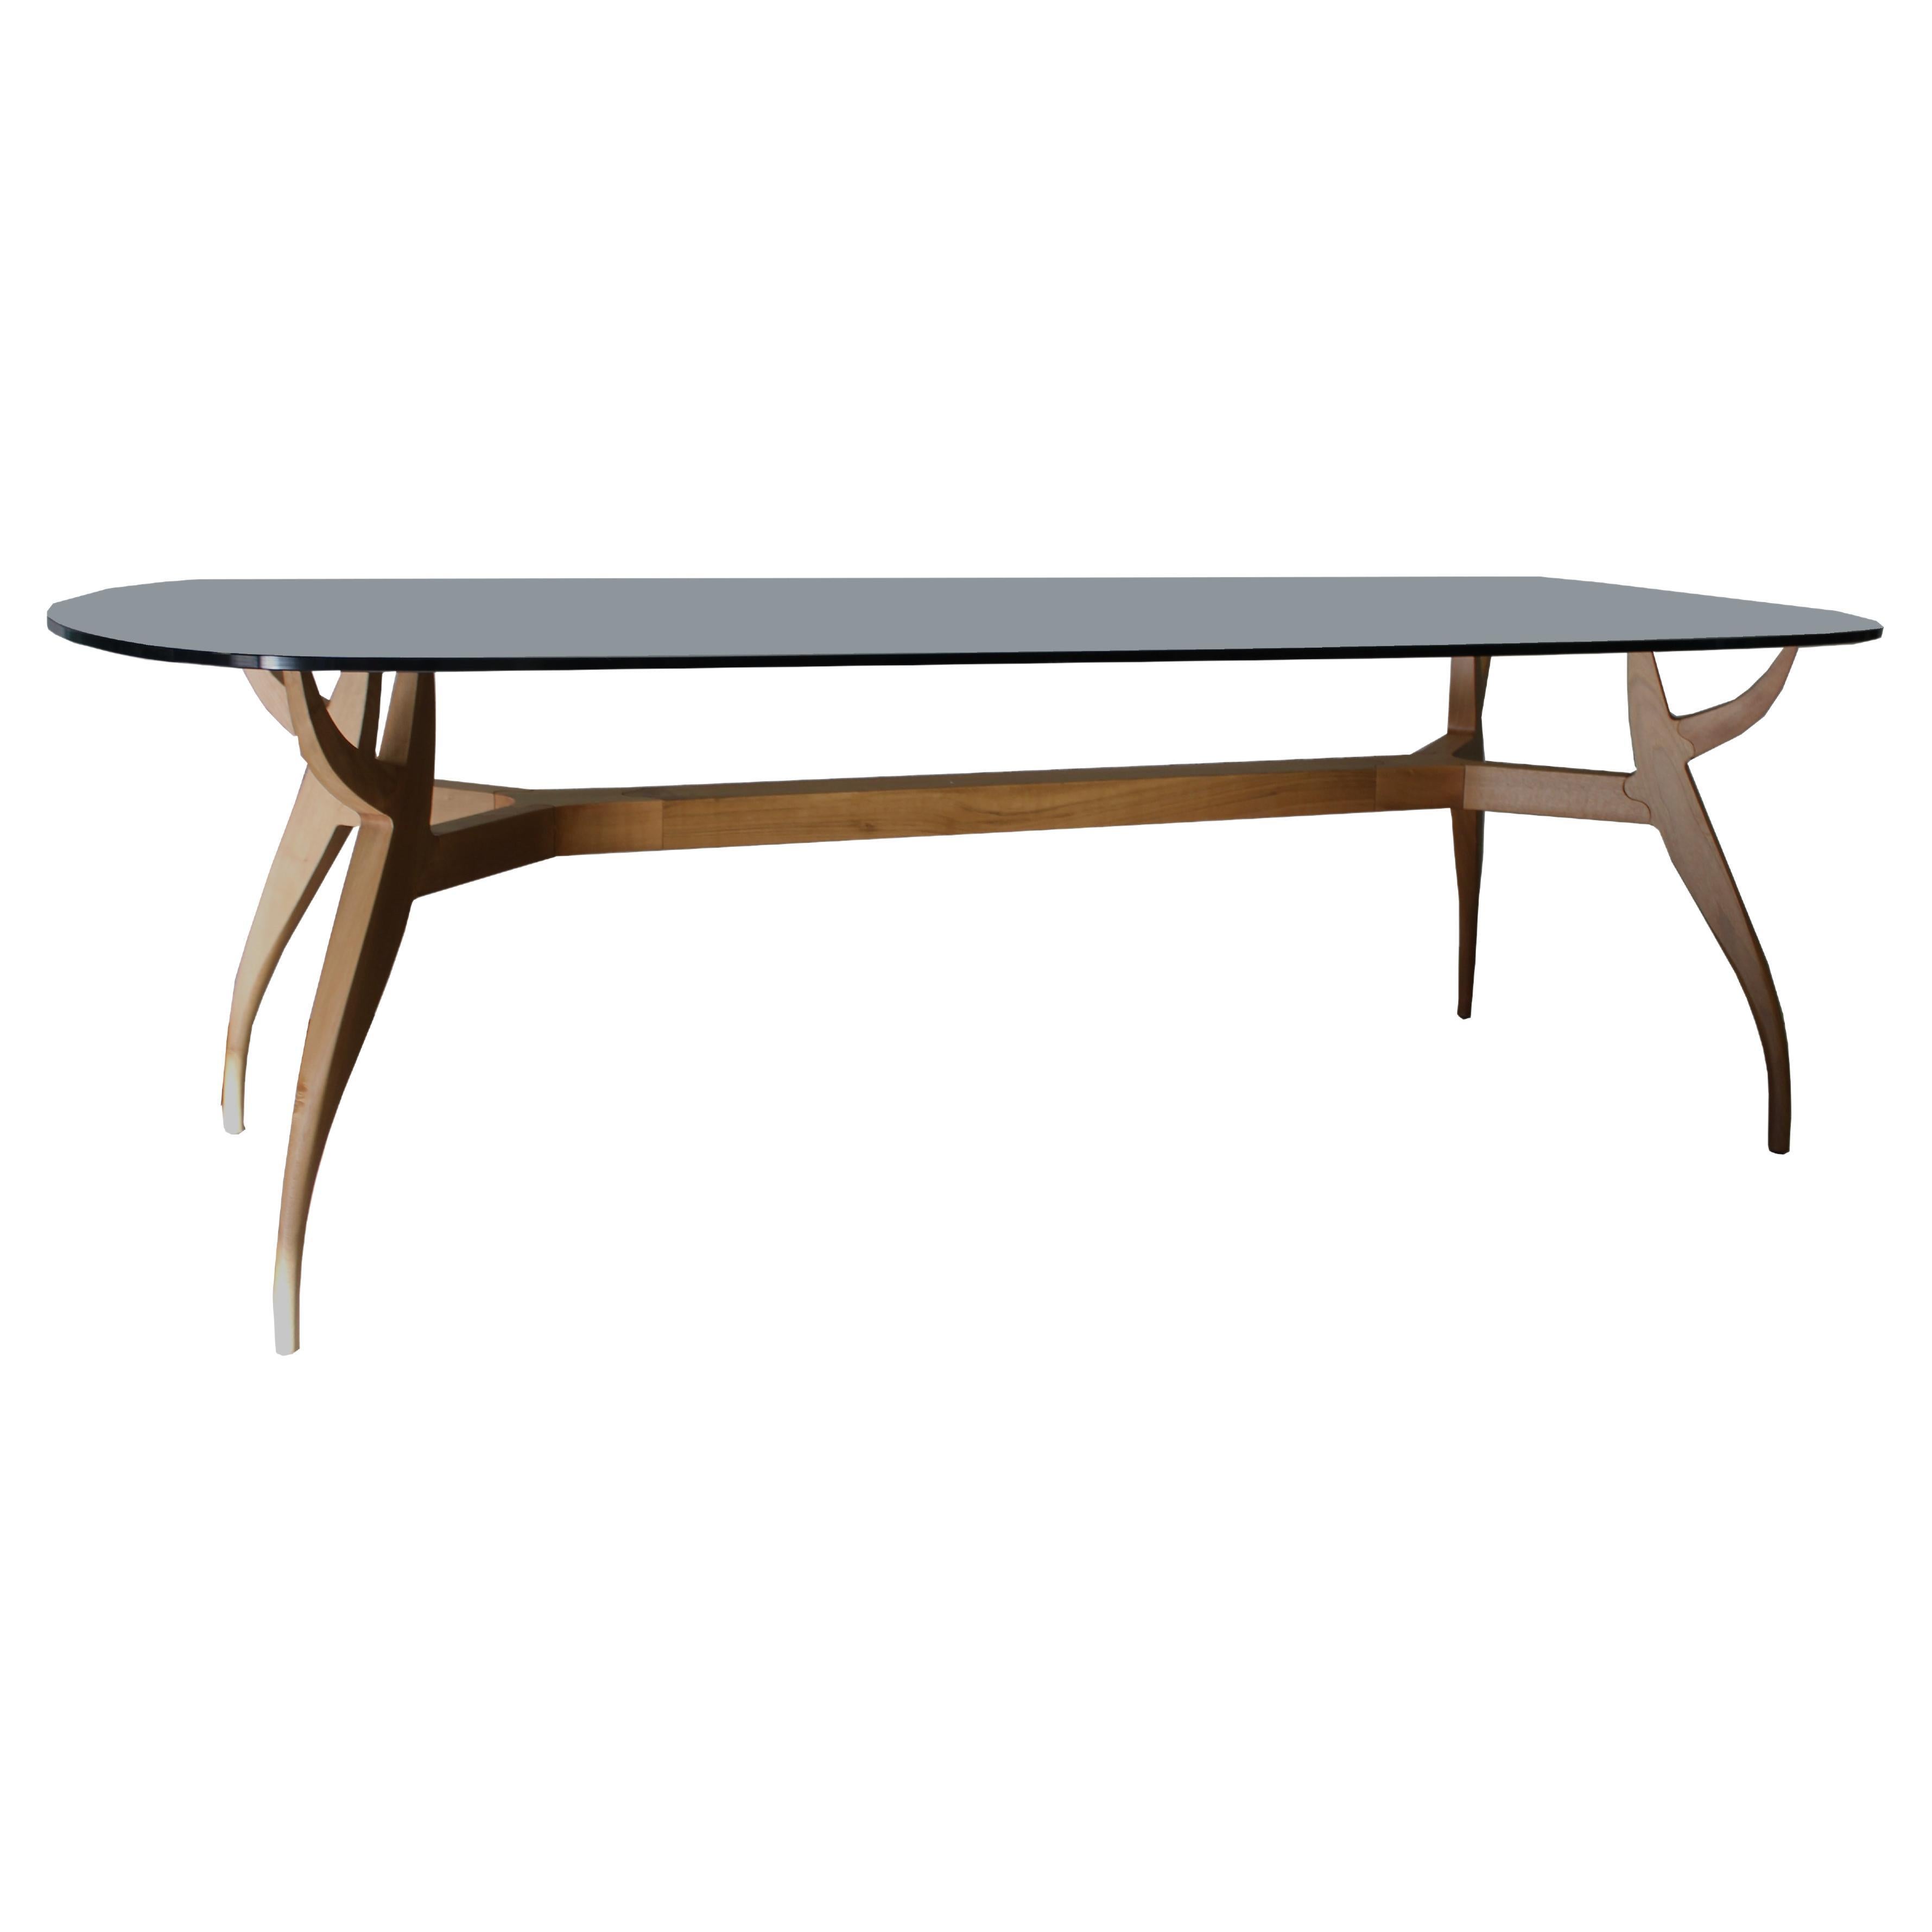 STAG Walnut Wood Dining Table with Glass Top designed by Nigel Coats For Sale